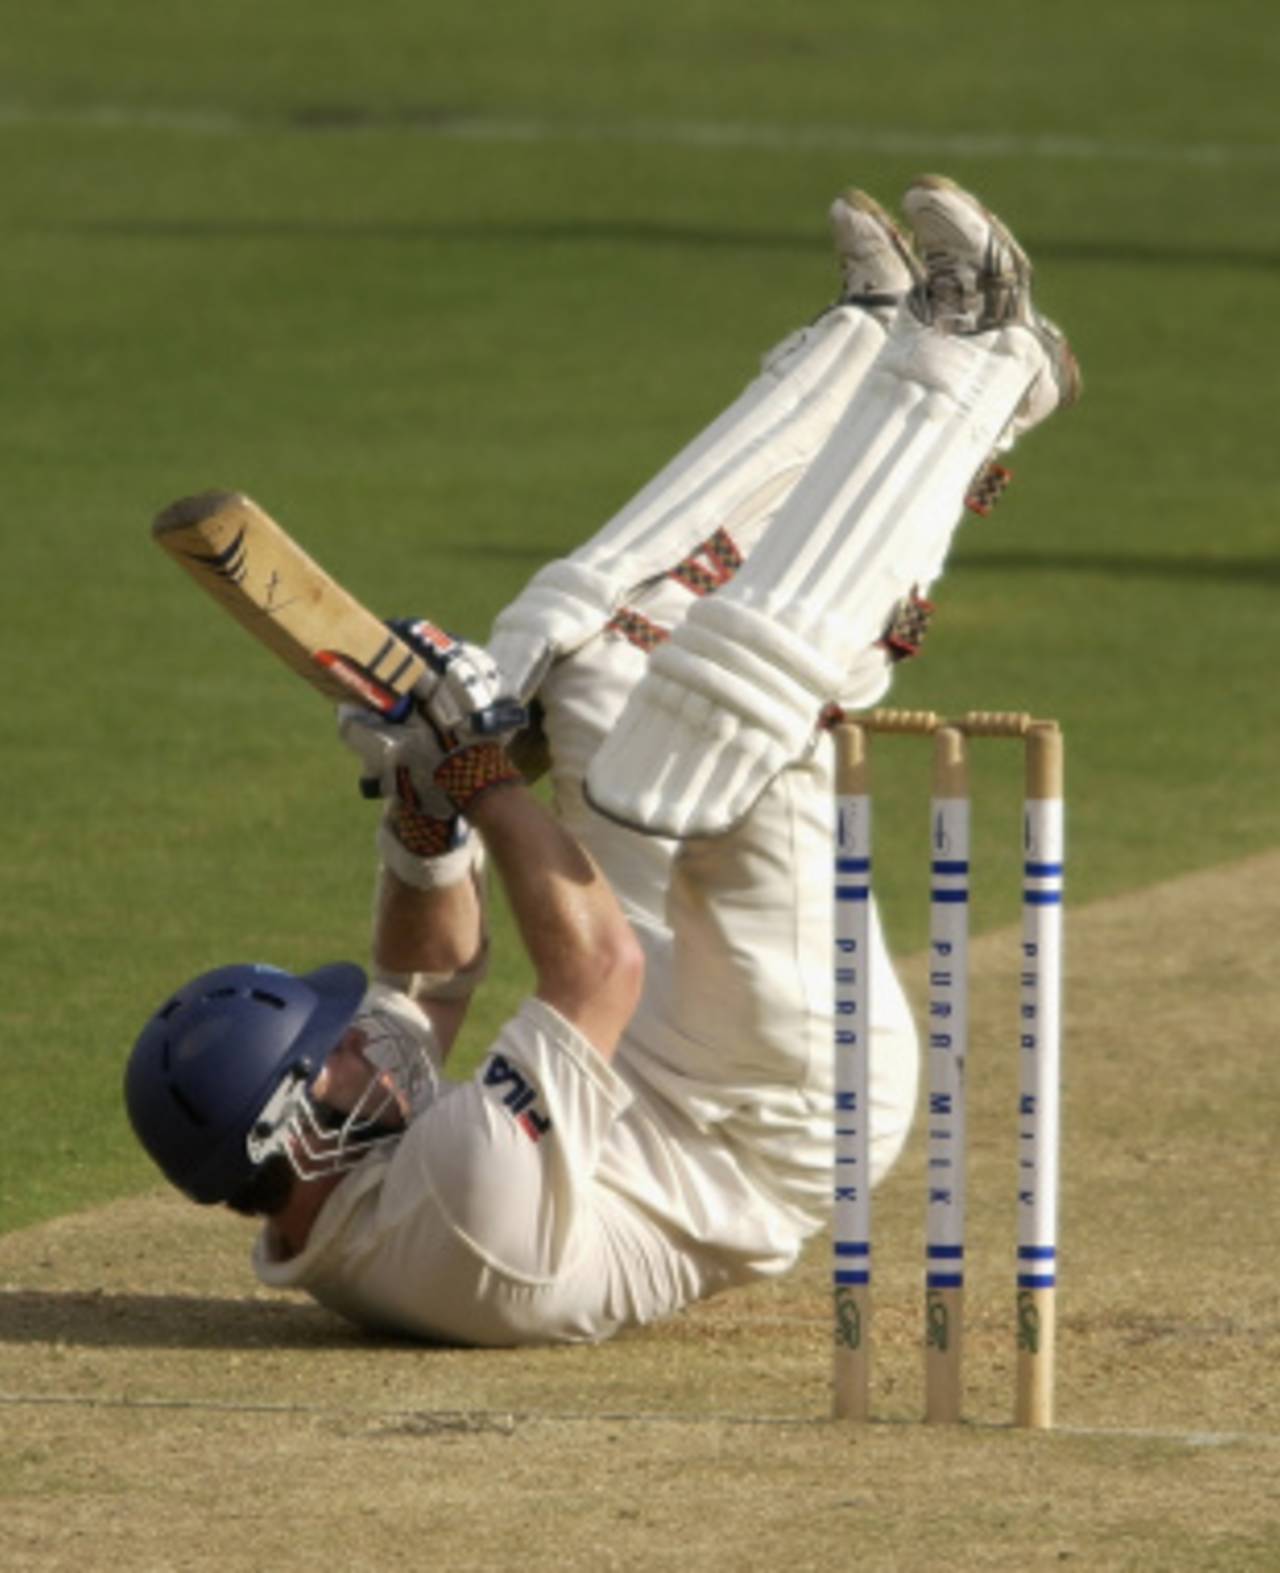 Michael Slater falls to the ground, Queensland v New South Wales, Pura Cup final, March 14, 2003